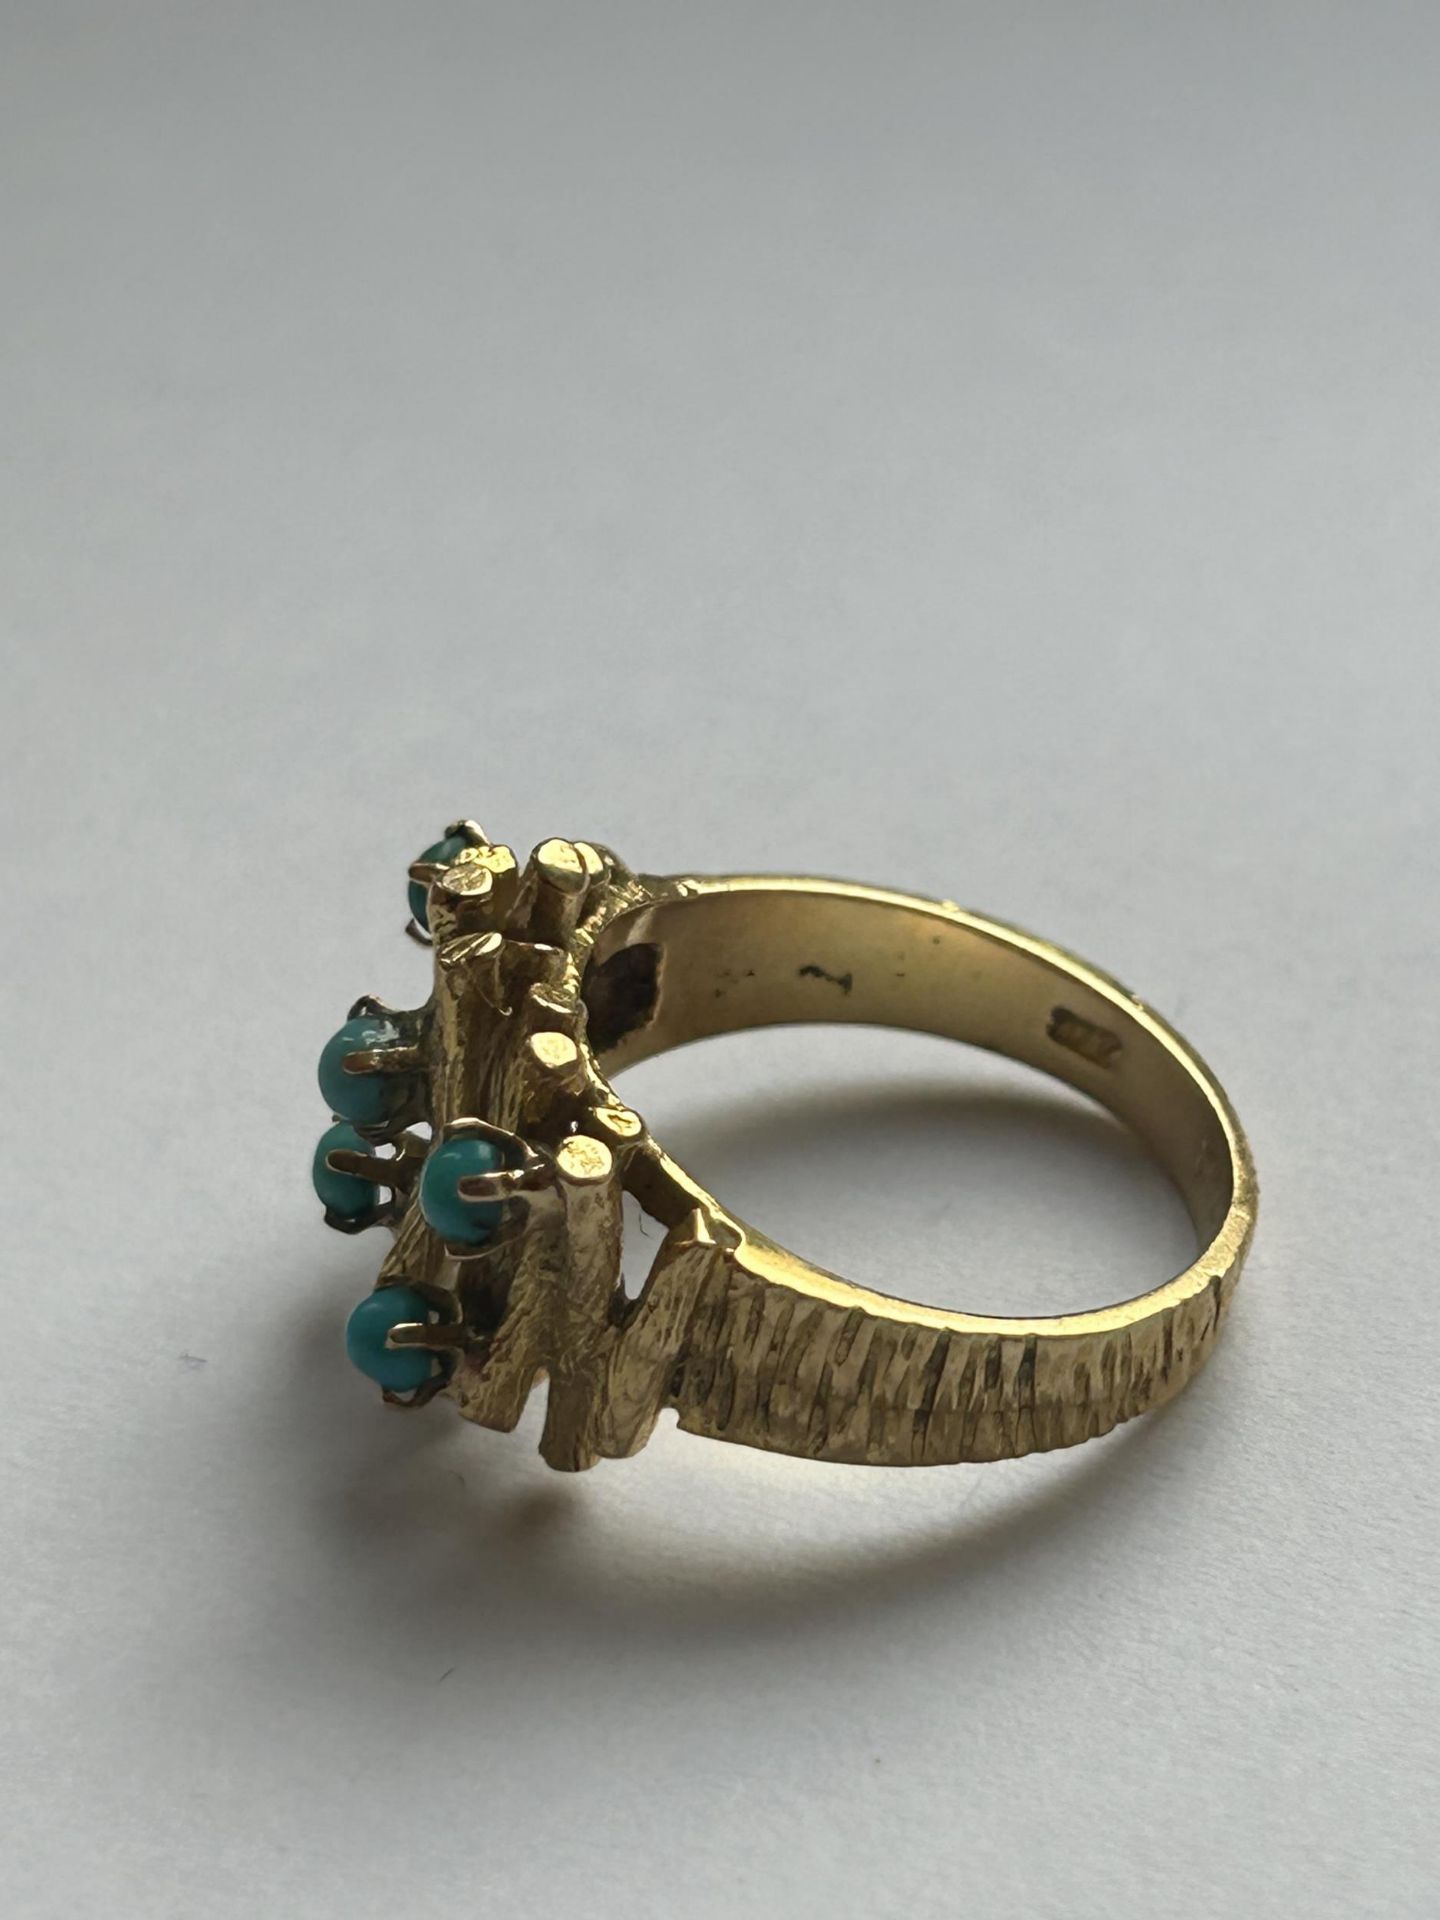 A 9CT YELLOW GOLD AND TURQUOISE STONE RING WITH BARK DESIGN SIZE L, WEIGHT 6.01 GRAMS - Image 3 of 4